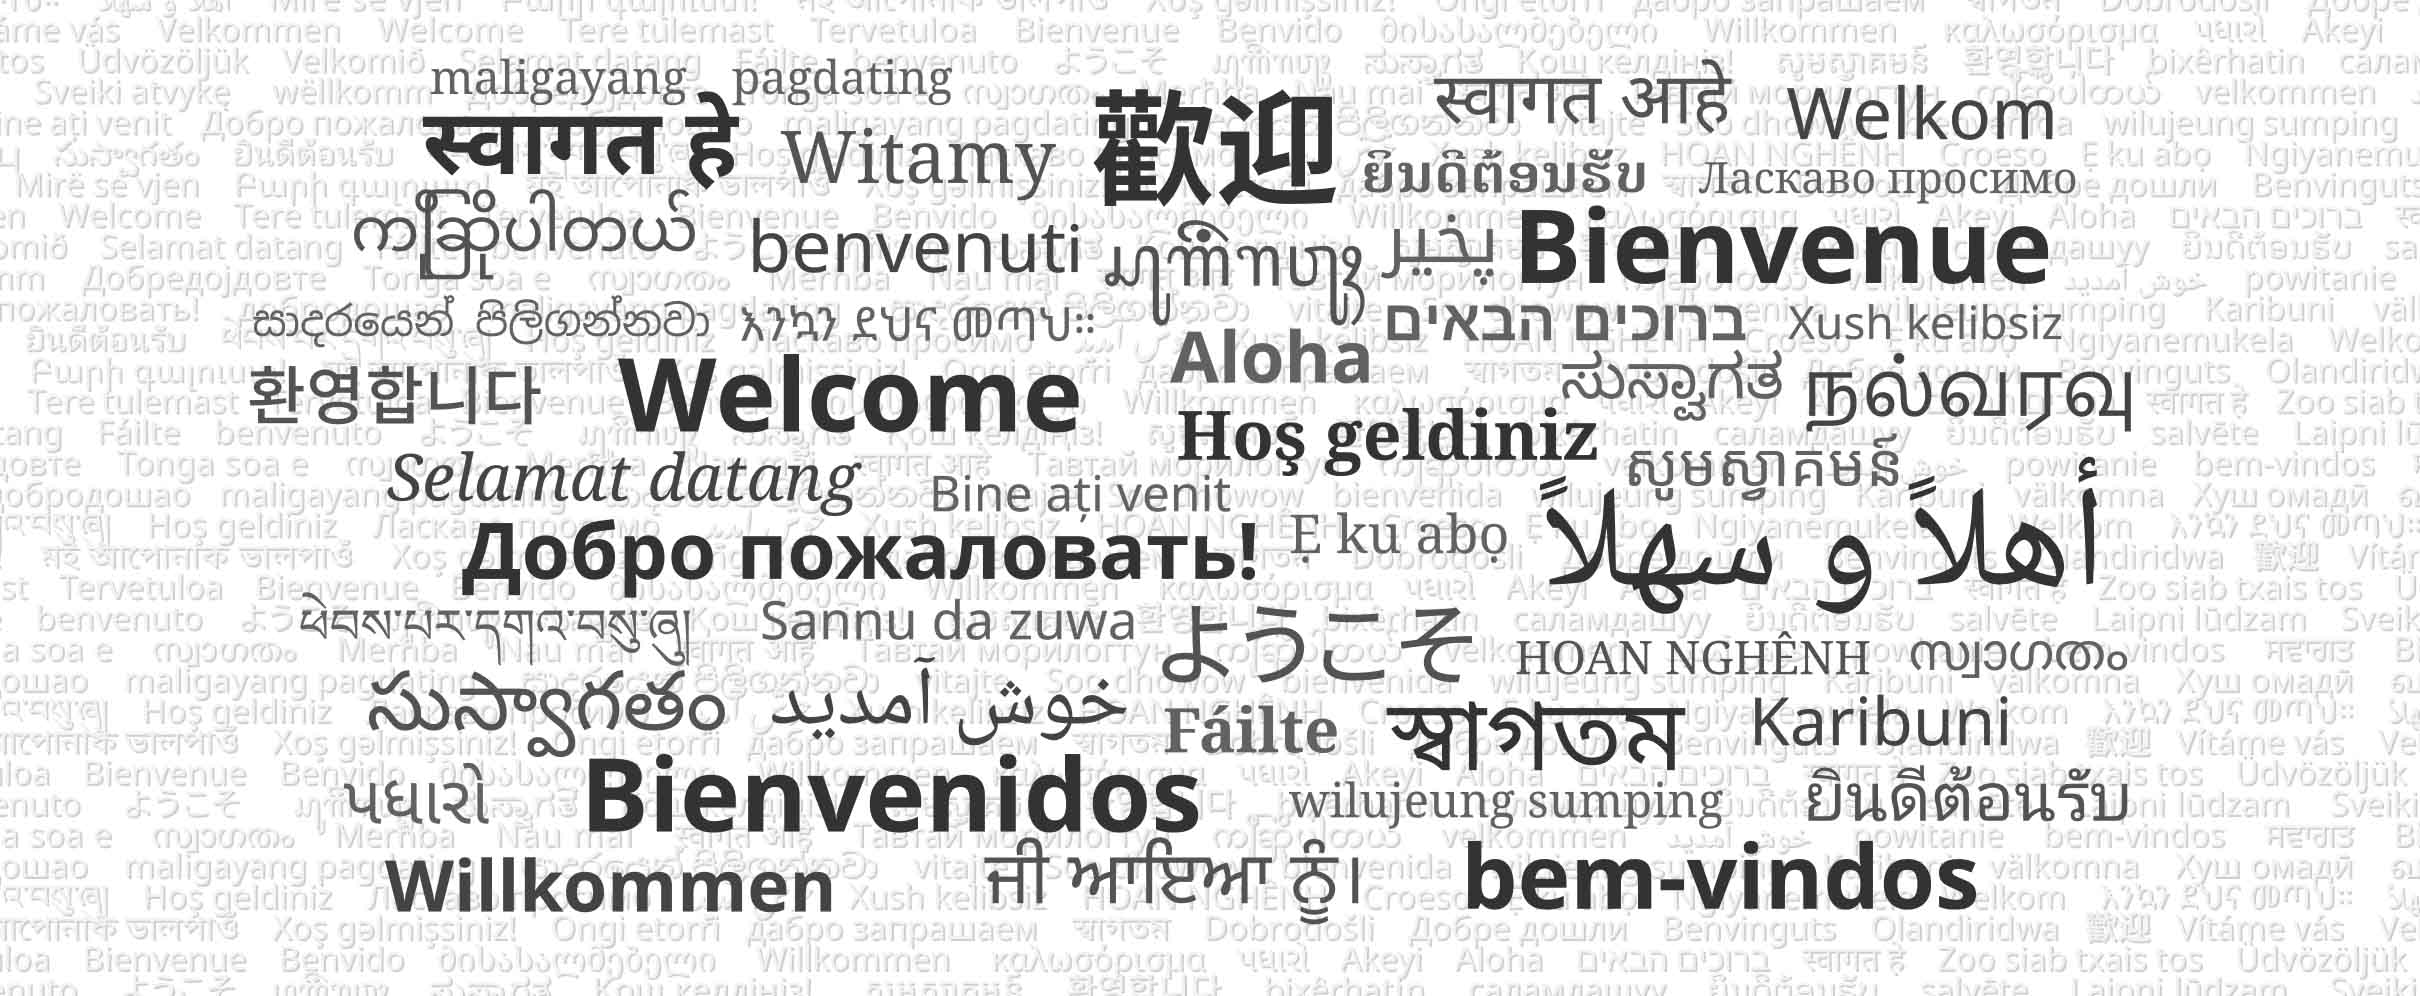 Black and white image showing the phrase 'Welcome' in several languages.